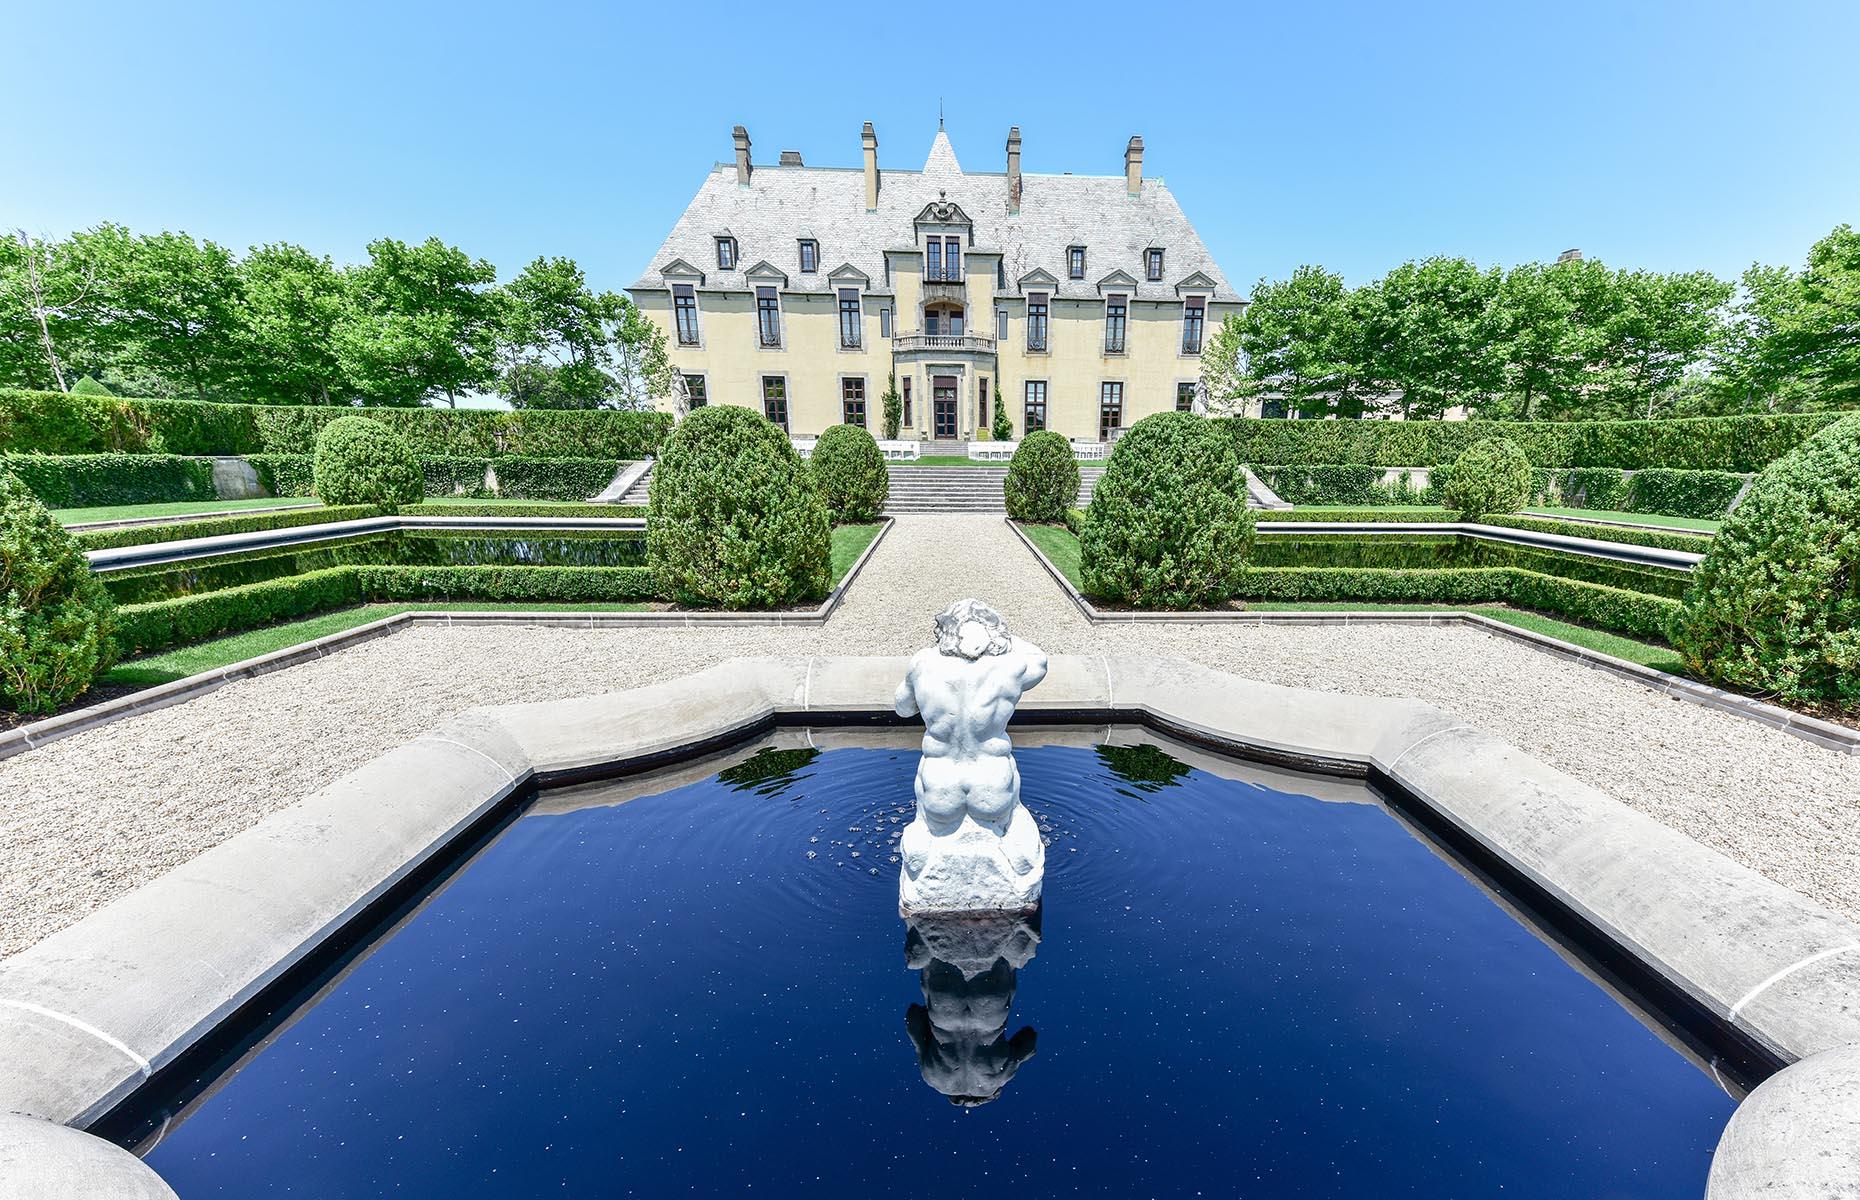 <p>Oheka Castle in Long Island is certainly a handsome mansion. But it’s the stories surrounding the mansion, built between 1914 and 1919, that really enchant. The second-largest private residence in the US (after the Biltmore Estate), it’s said to be the inspiration behind the glitzy manor in F. Scott Fitzgerald’s novel <em>The Great Gatsby</em>. Thanks to its grandeur and European-like appearance, it’s also featured in diverse productions from <em>Citizen Kane</em> to a Taylor Swift music video.</p>